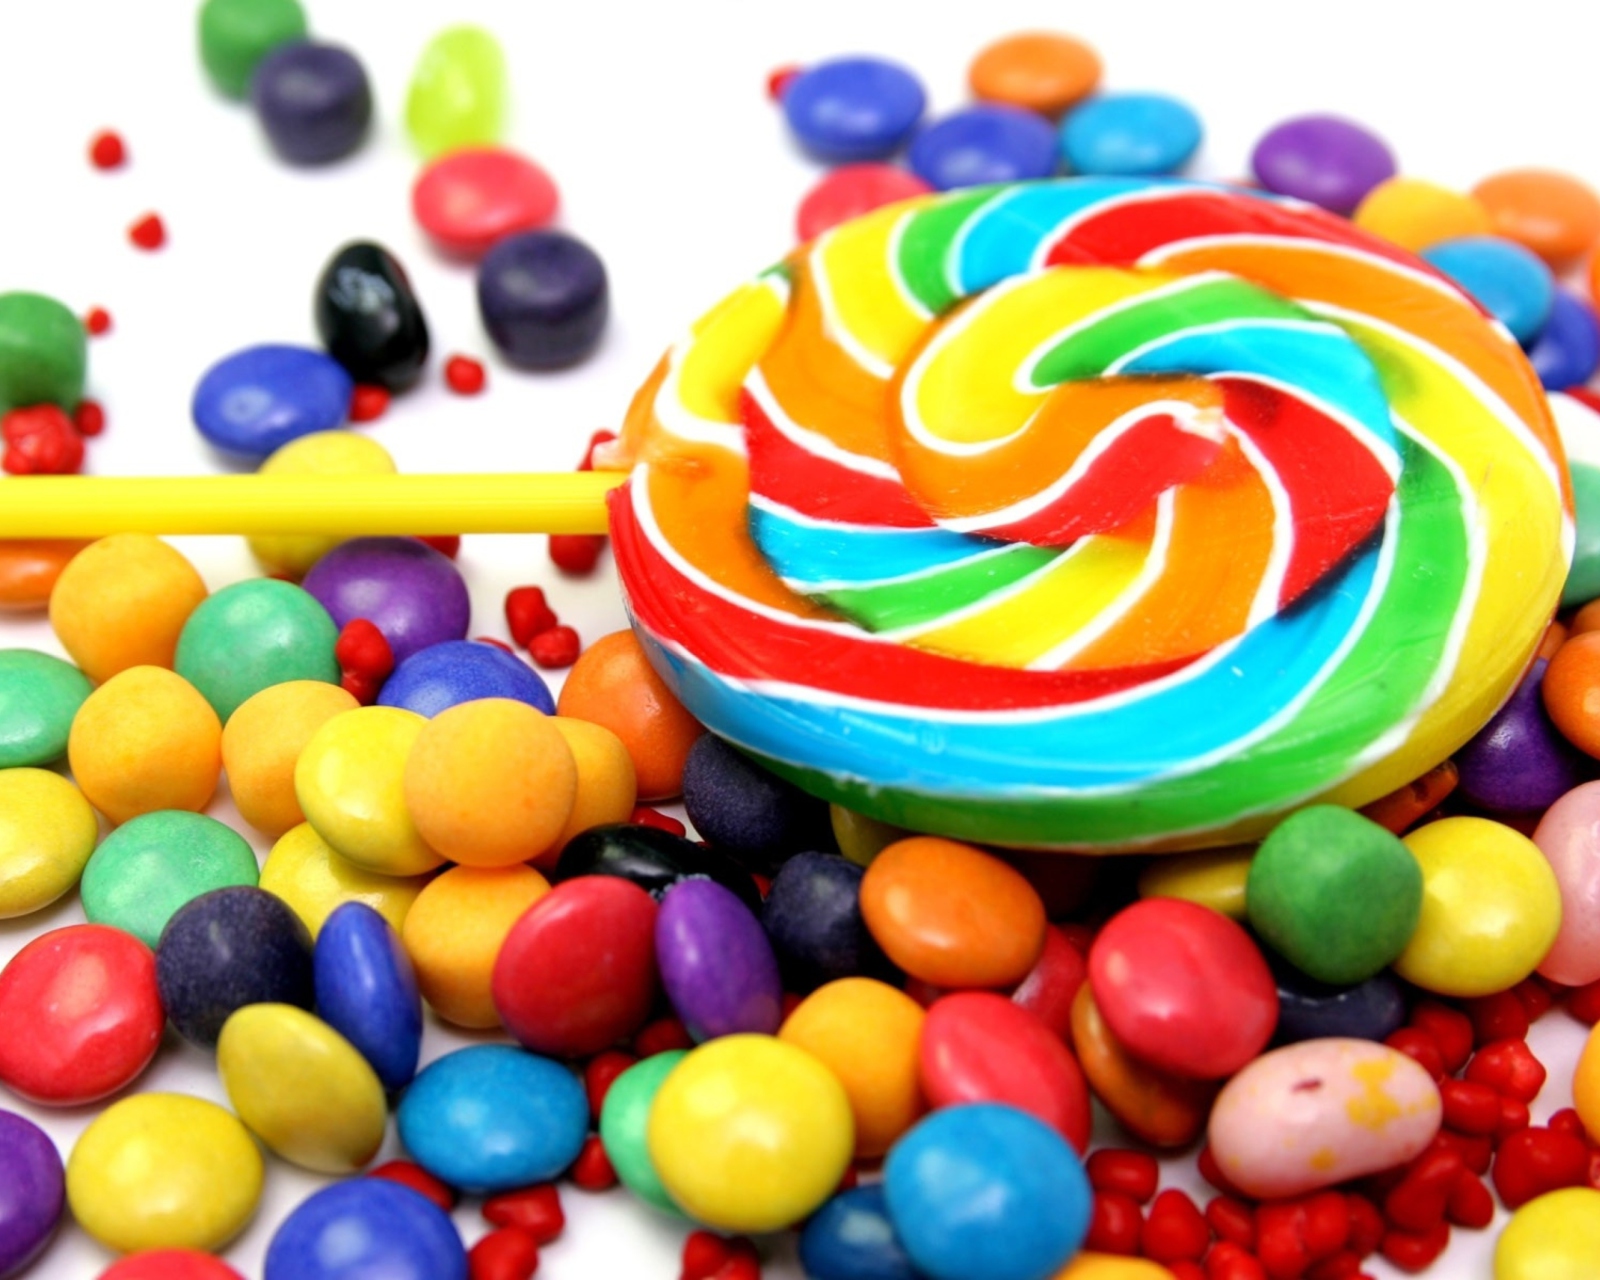 Colorful Candies wallpaper 1600x1280